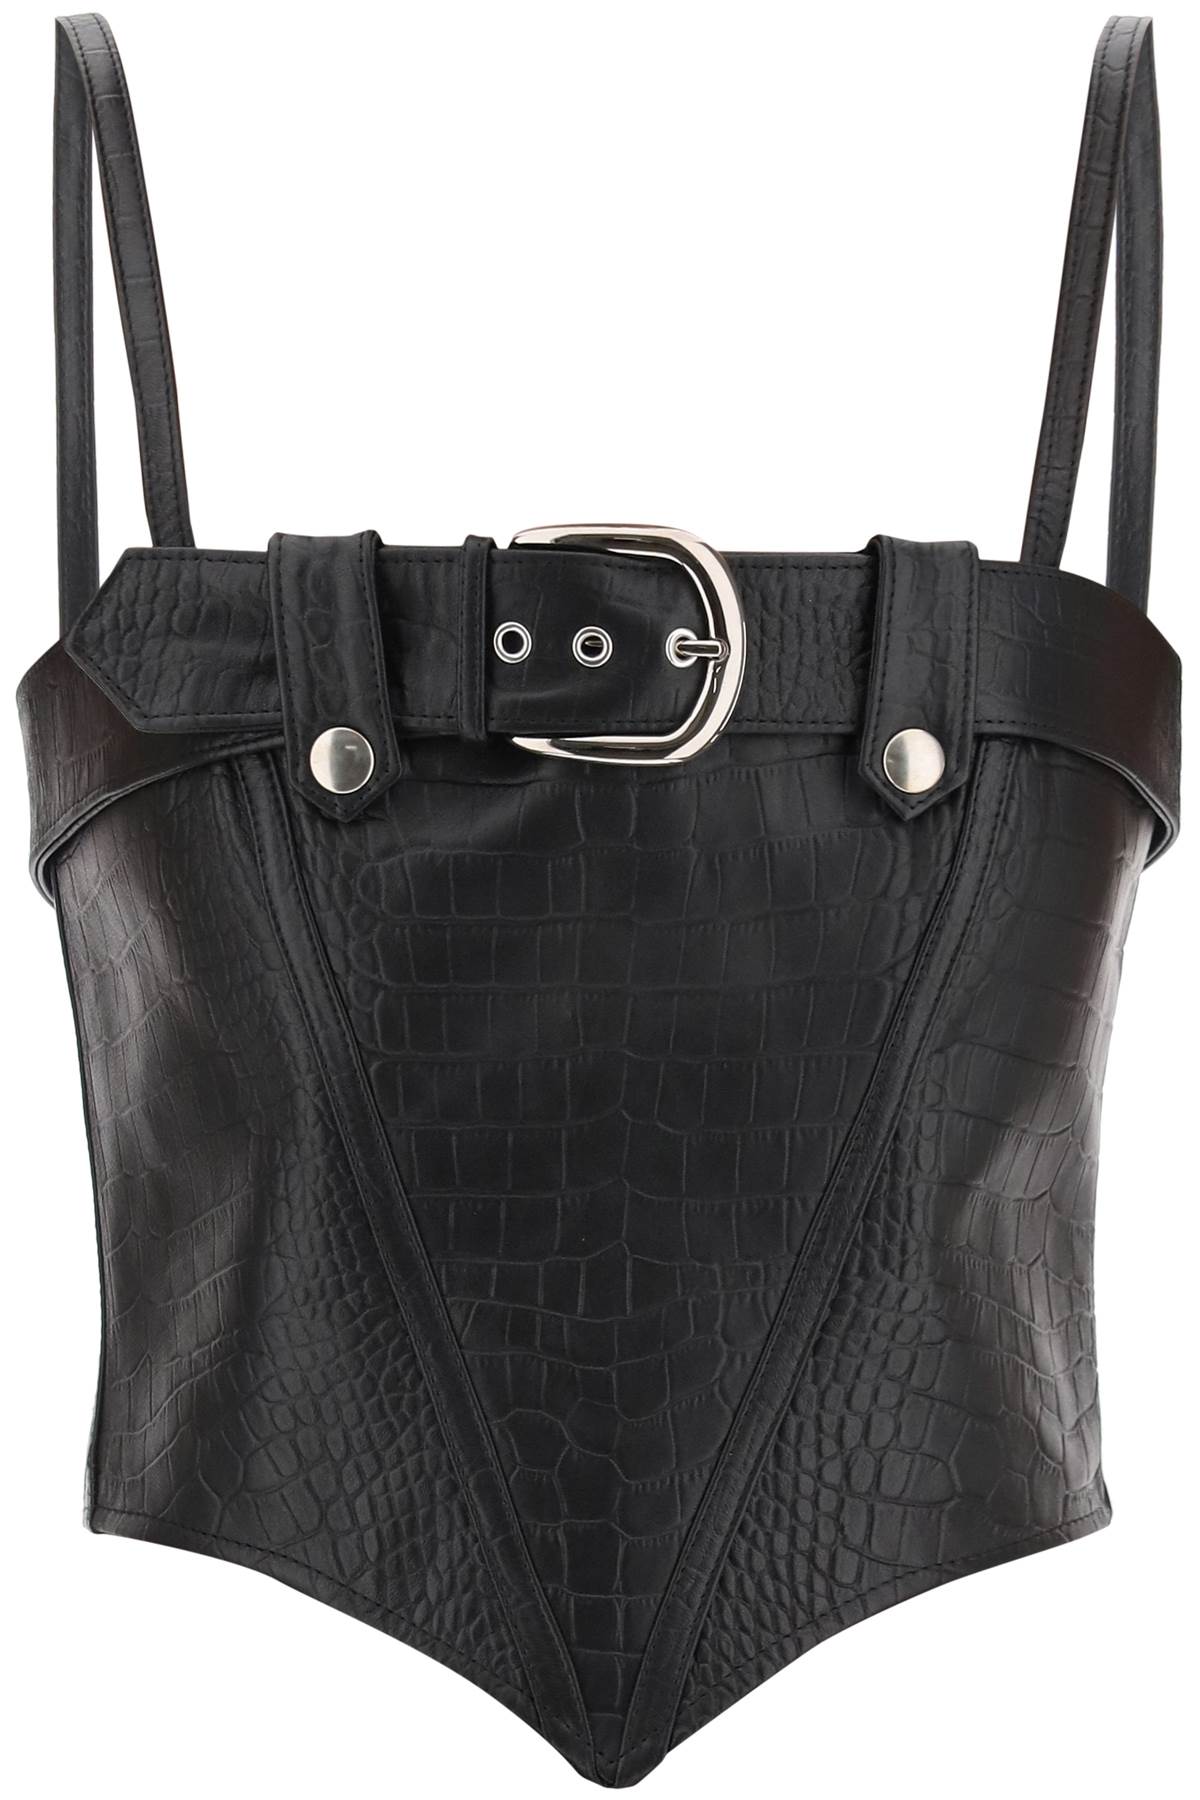 Alessandra rich croco-print leather bustier top-women > clothing > tops-Alessandra Rich-Urbanheer